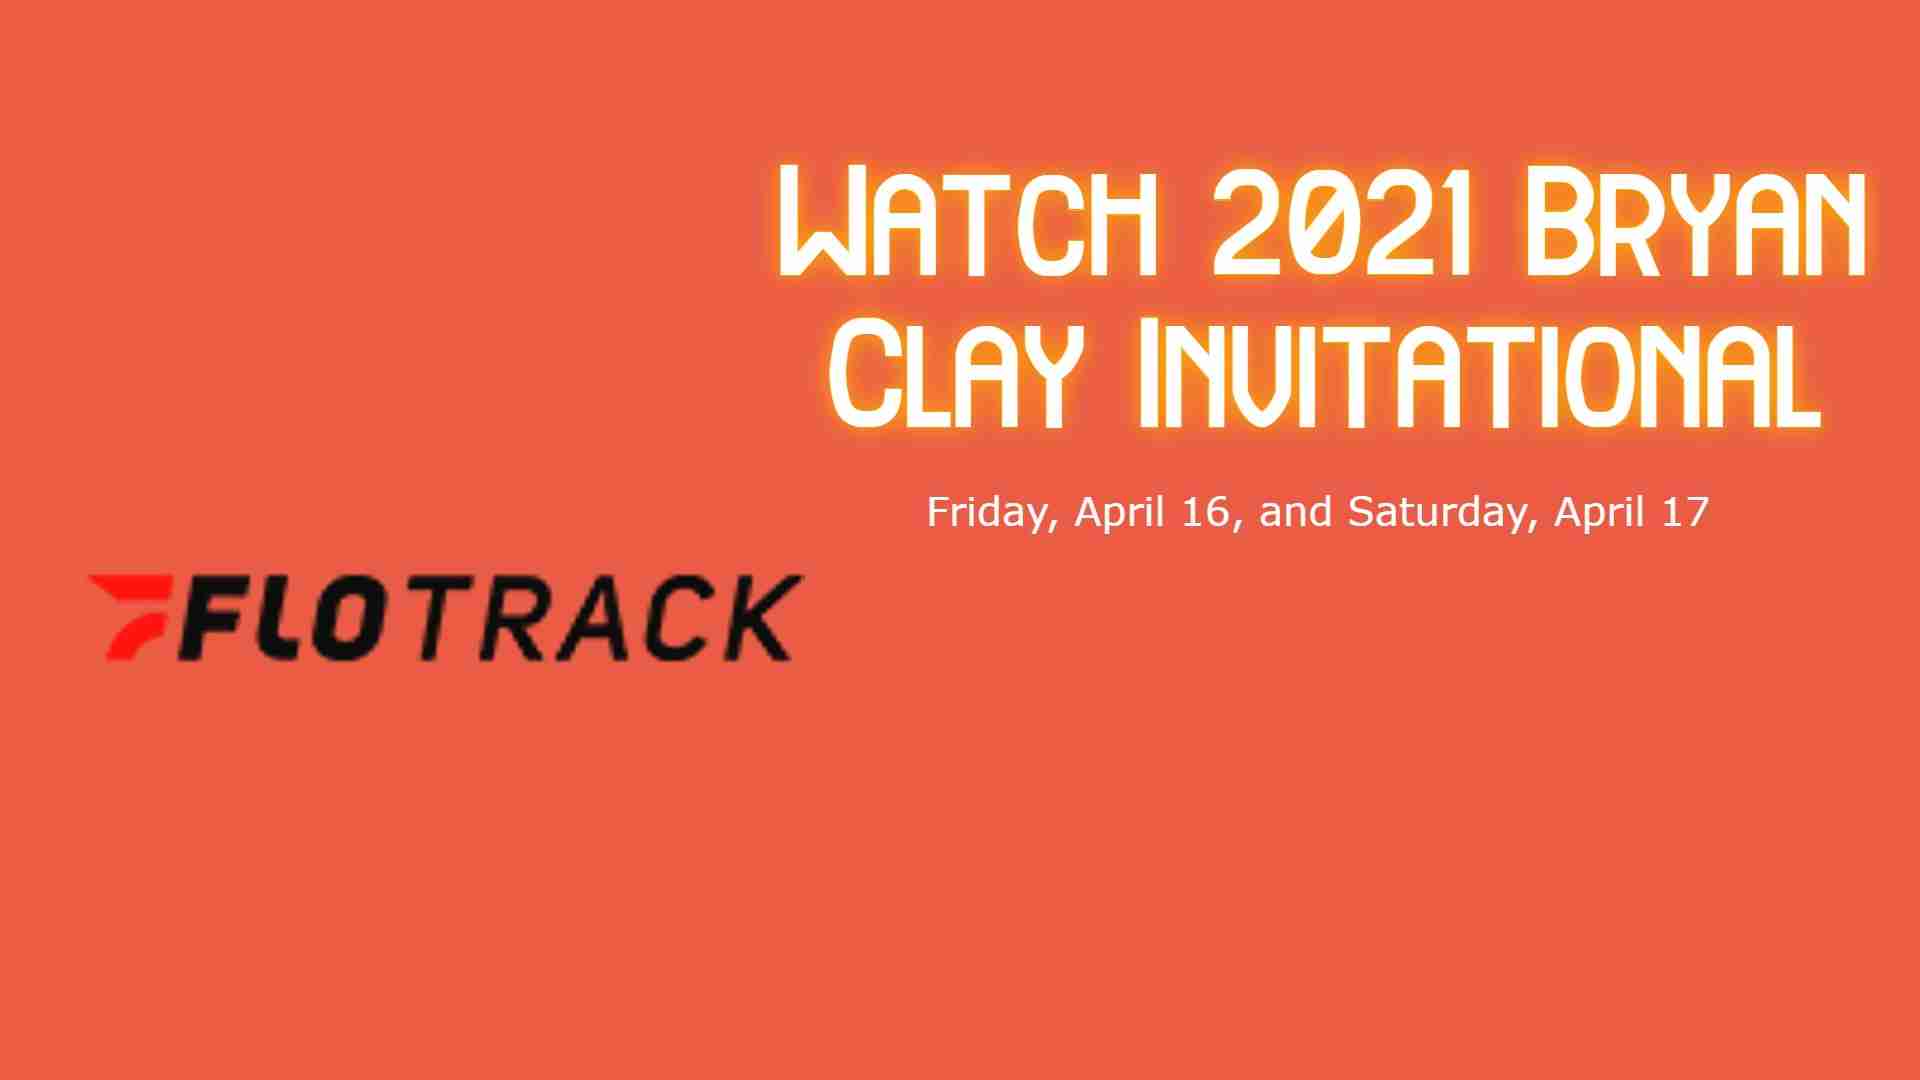 How To Watch 2021 Bryan Clay Invitational [Live Stream]